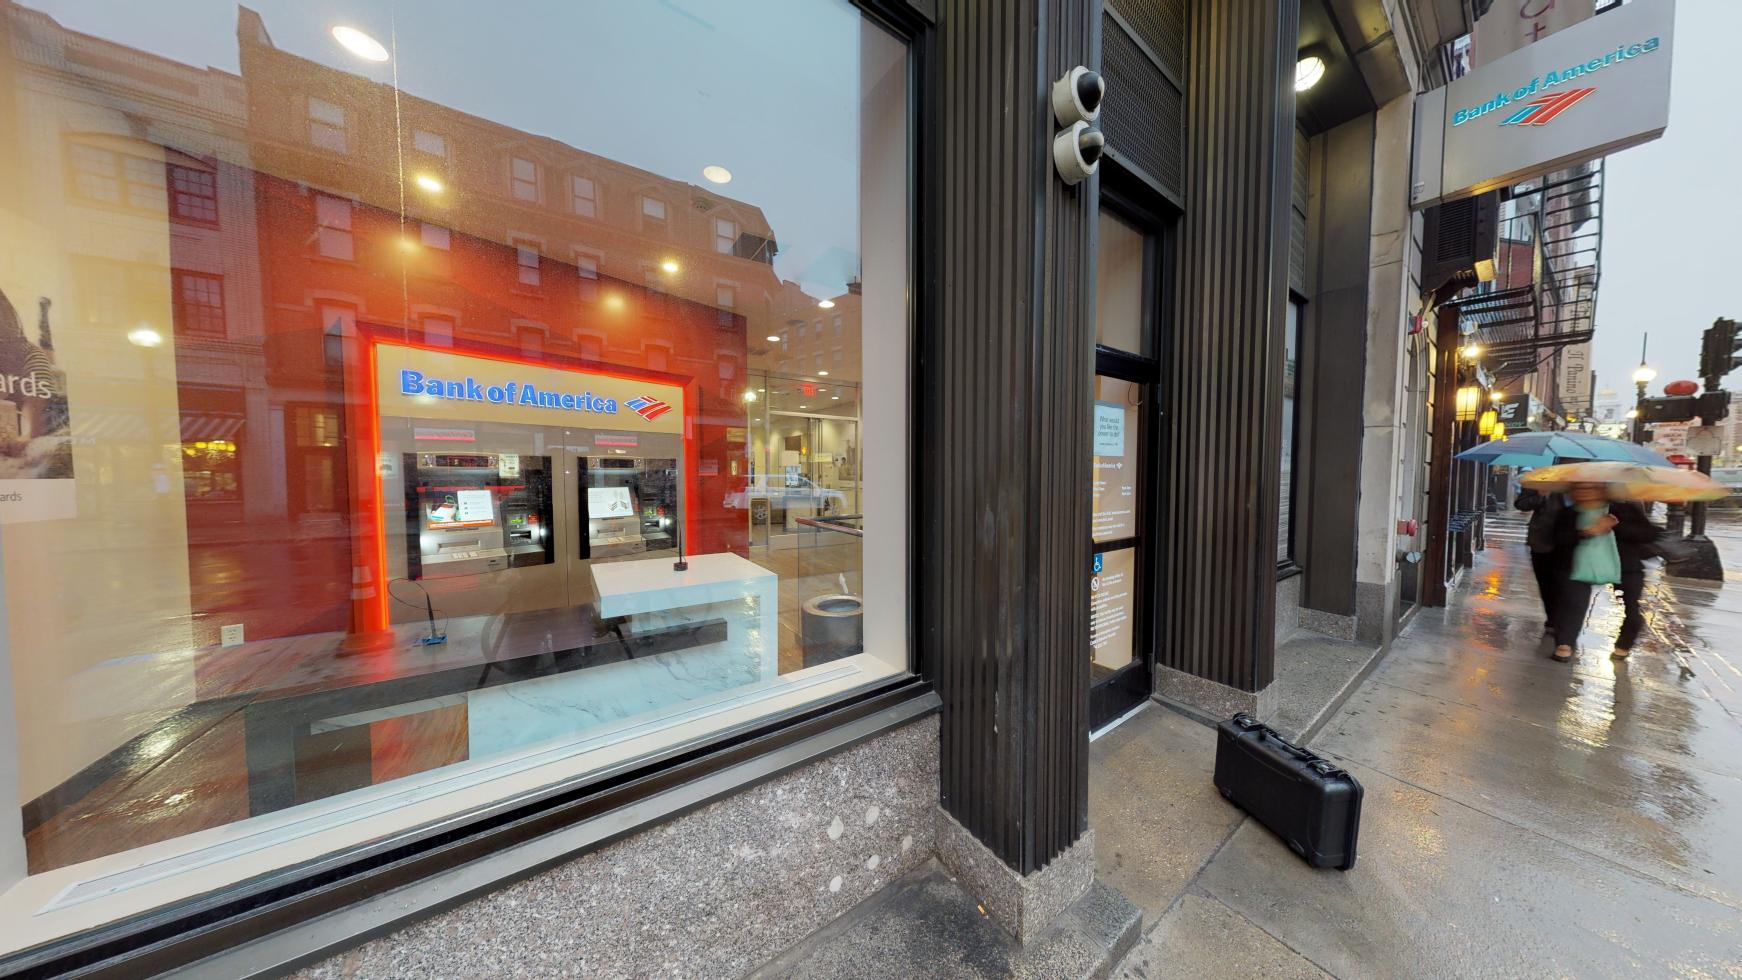 Bank of America financial center with walk-up ATM | 260 Hanover St, Boston, MA 02113